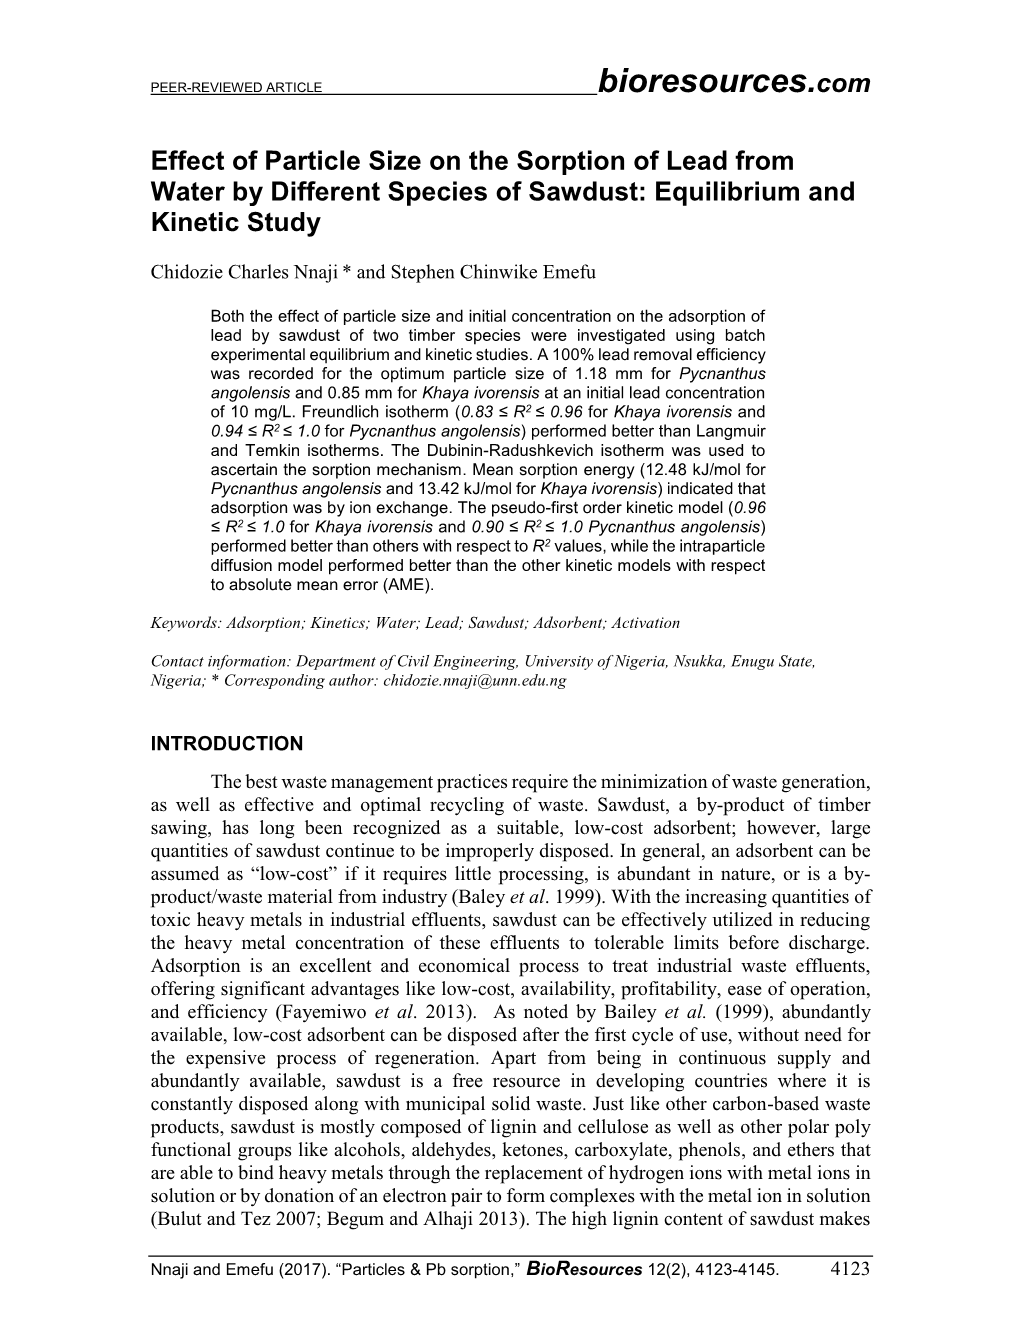 Effect of Particle Size on the Sorption of Lead from Water by Different Species of Sawdust: Equilibrium and Kinetic Study